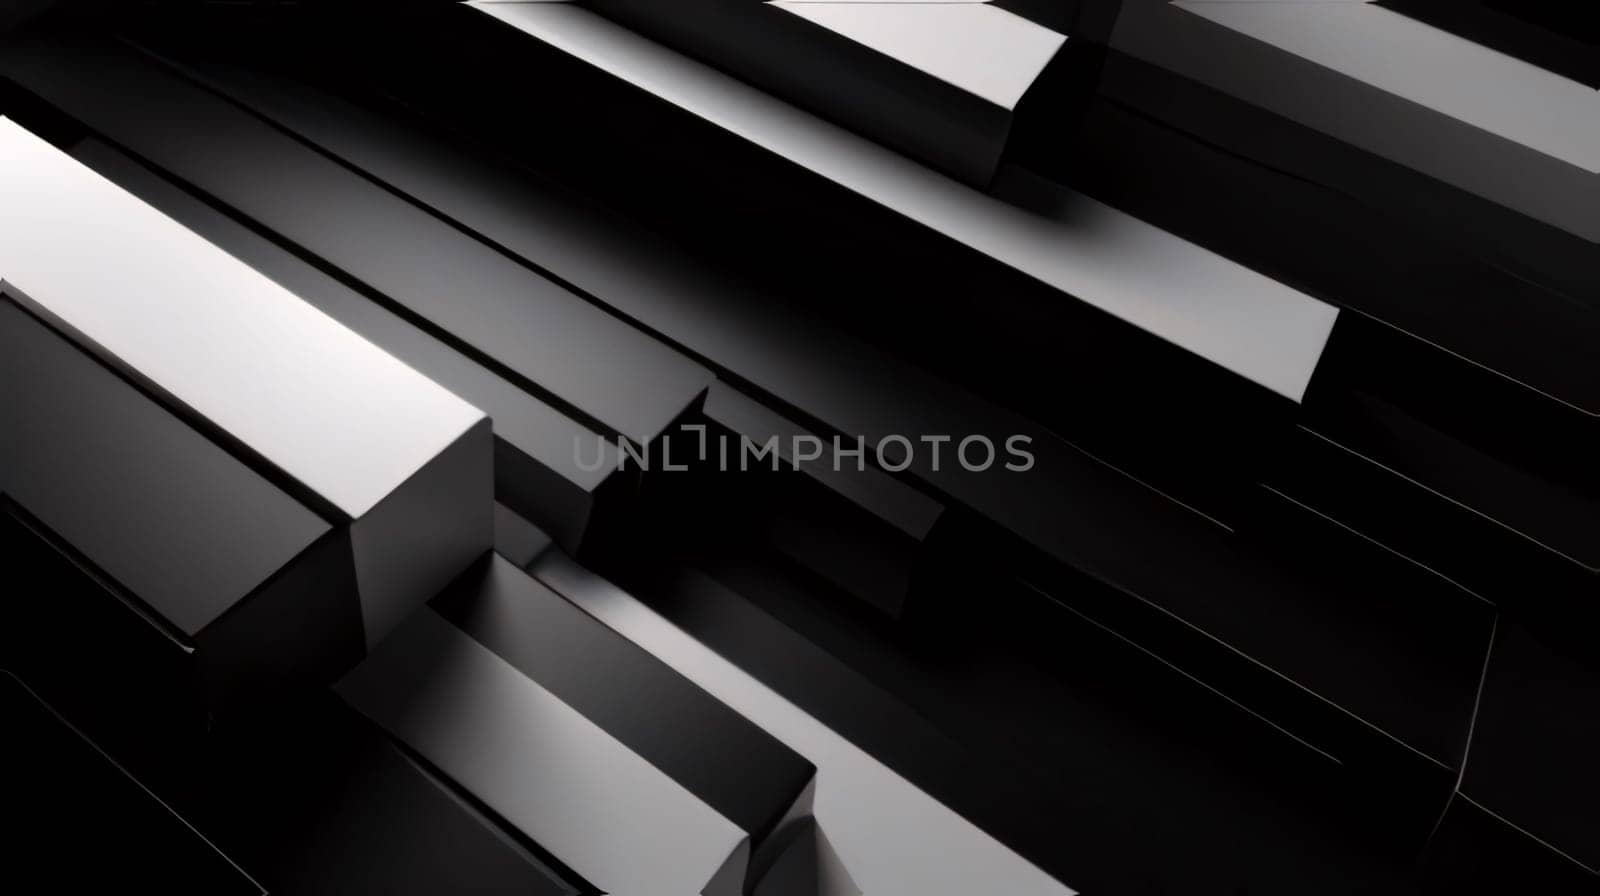 Abstract background design: Abstract 3d rendering of black geometric shapes. Bended stripes background. Reflective surface pattern.